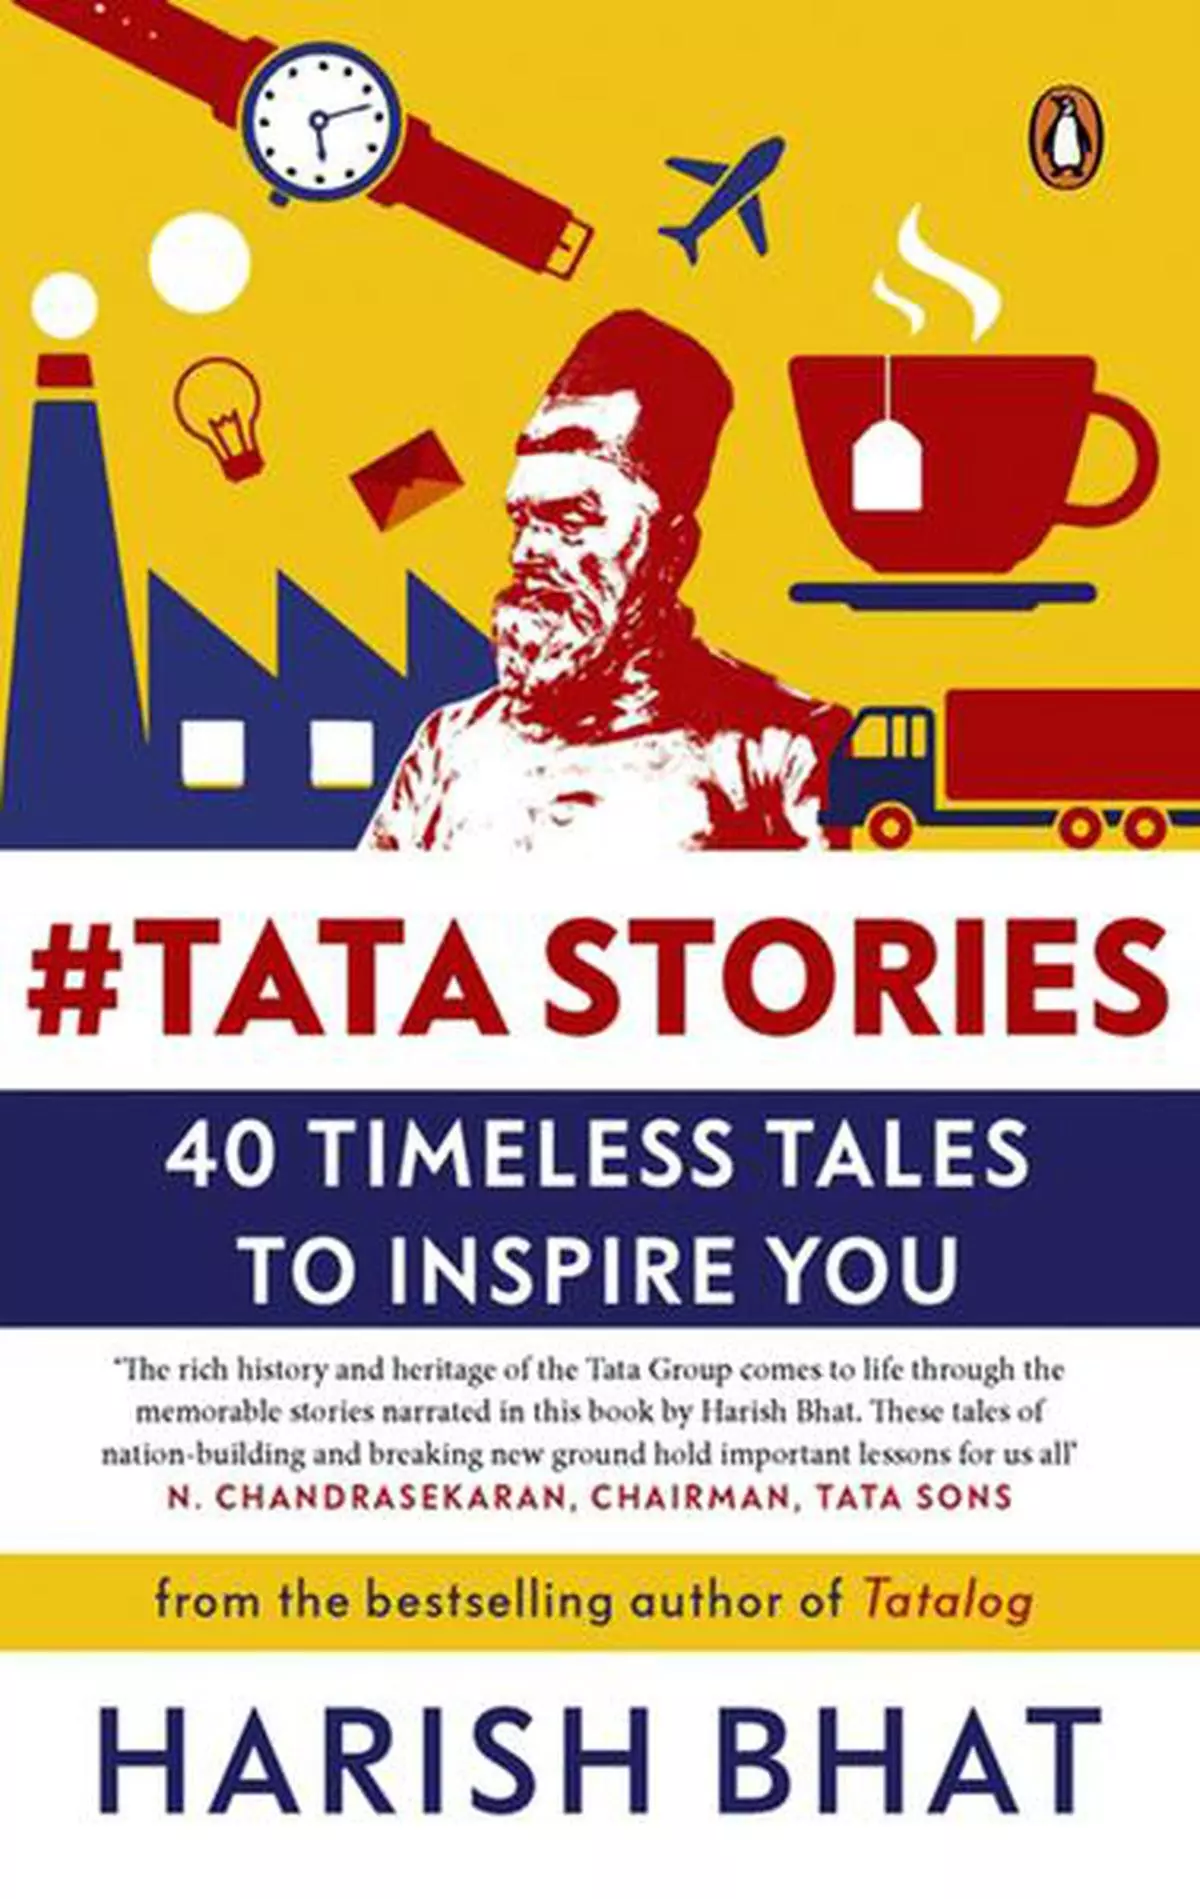 Title: Tata Stories: 40 Timeless Tales to Inspire YouAuthor: Harish BhatPublisher: Penguin Random House IndiaPrice: ₹599